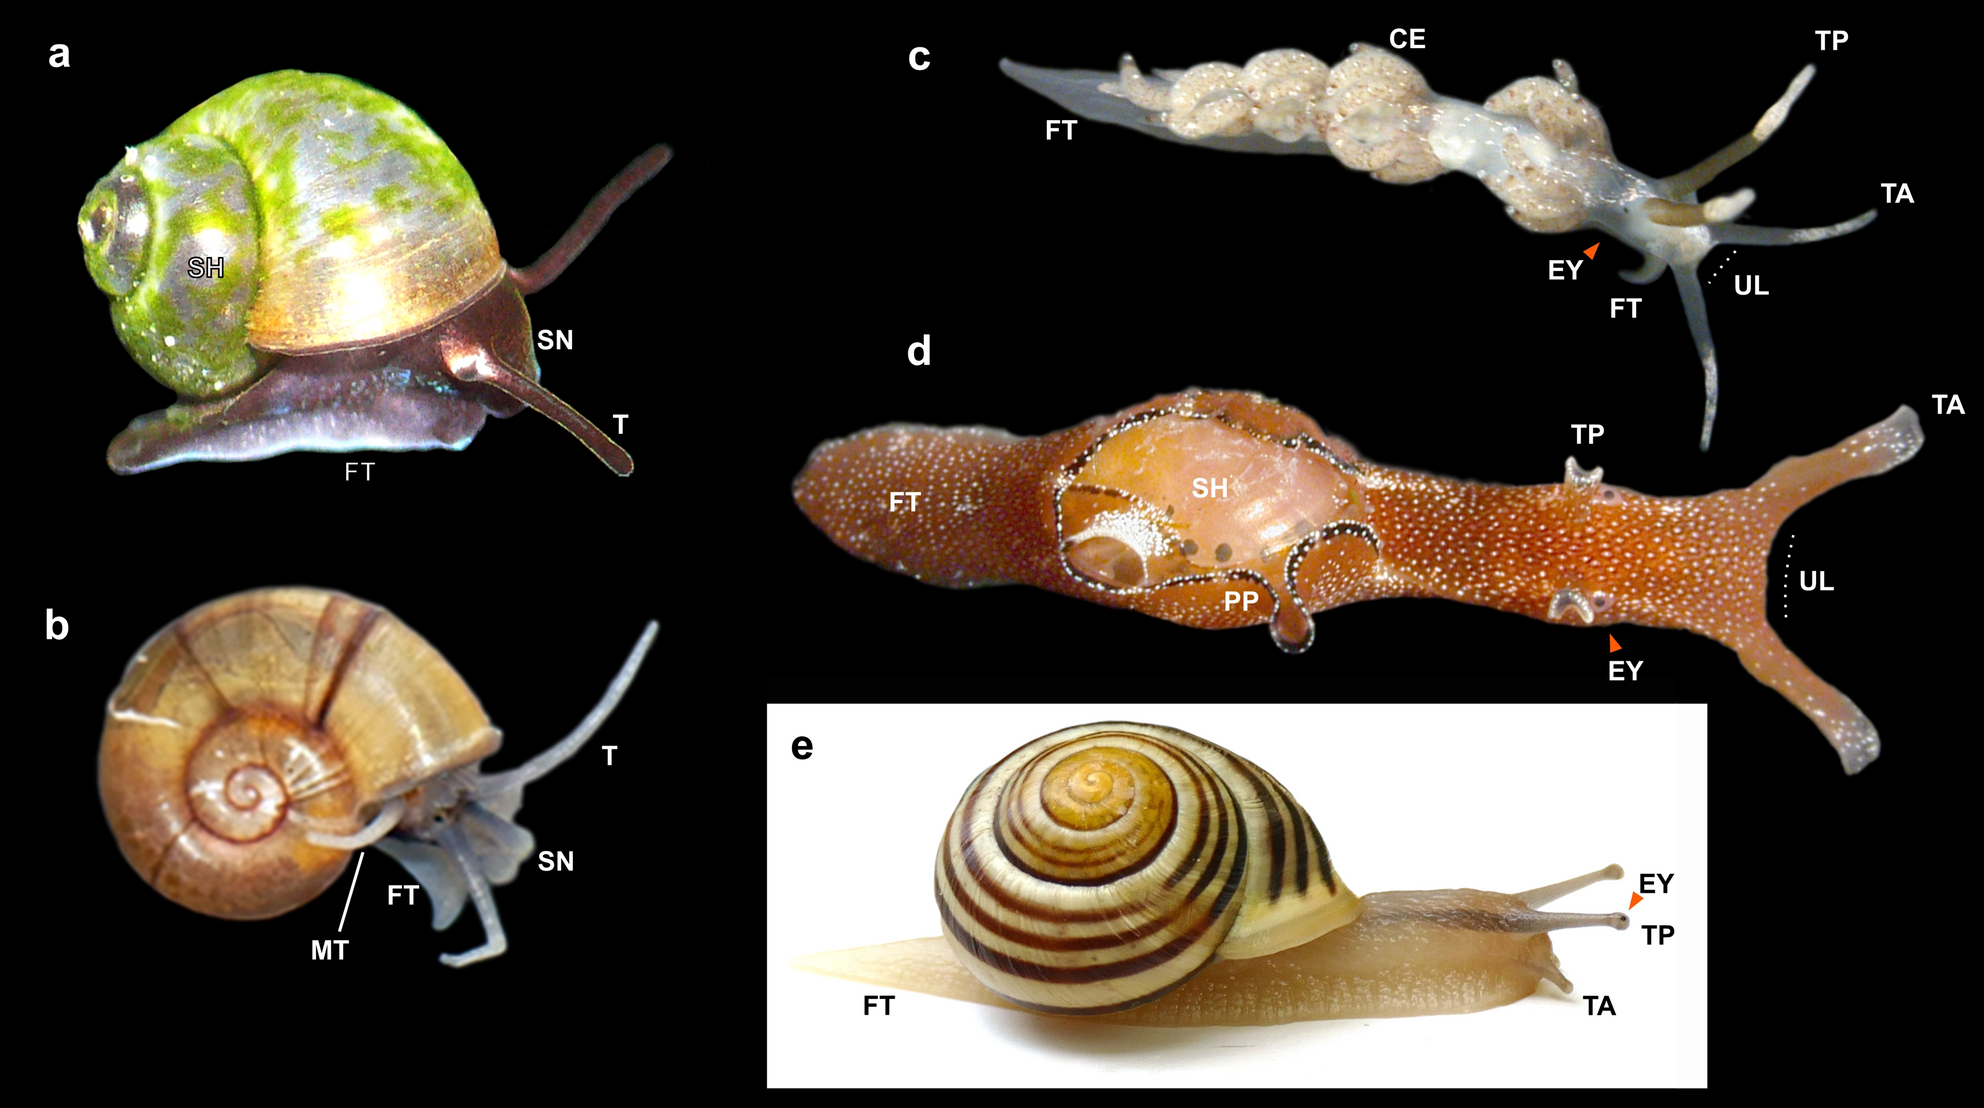 What are slug tentacles called?